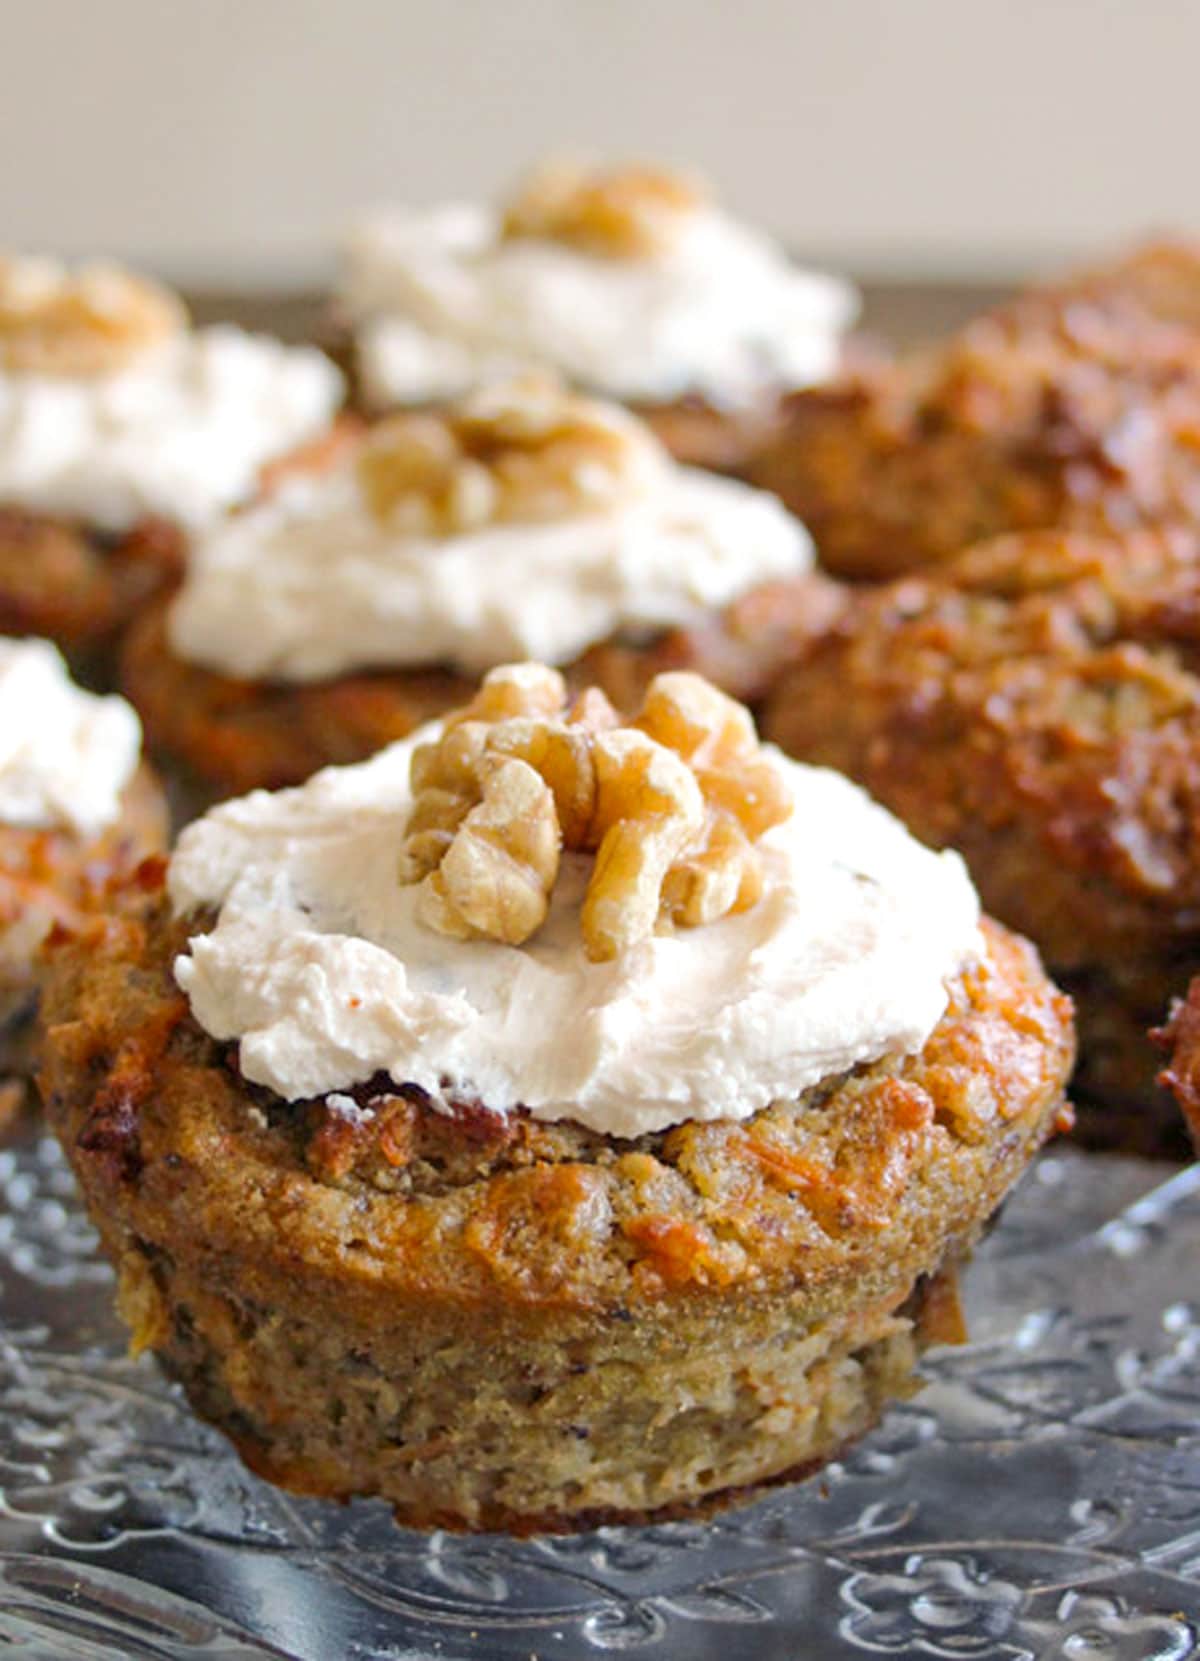 A sugar free carrot cake muffin topped with cream cheese frosting.